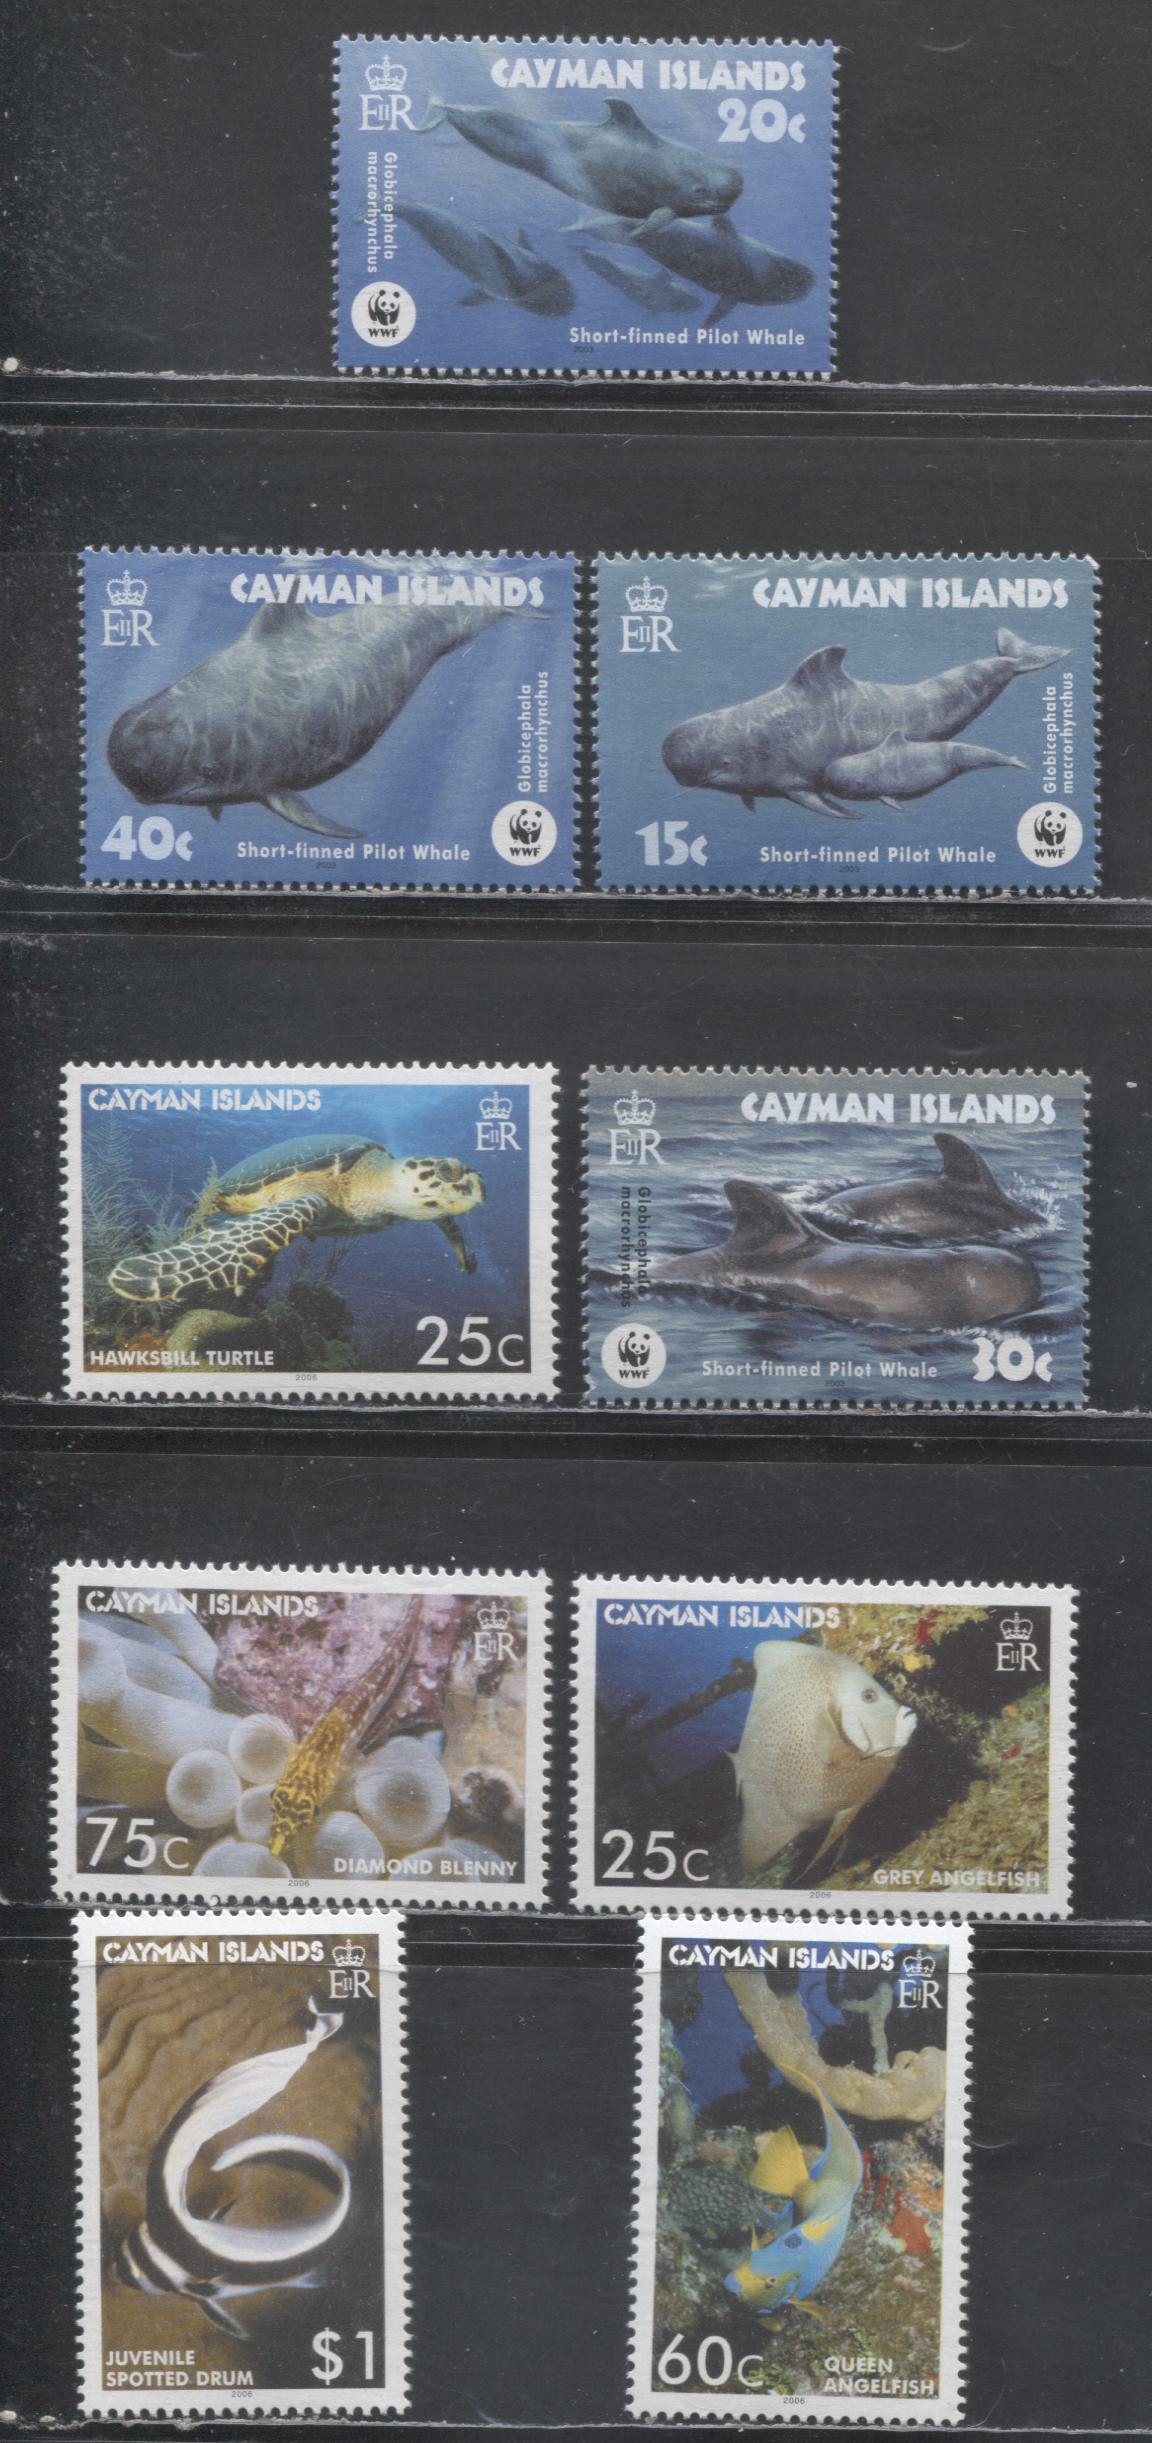 Lot 146 Cayman Islands SC#902/966 2003-2006 WWF - Marine Life Issues, 9 VFNH Singles, Click on Listing to See ALL Pictures, 2017 Scott Cat. $19